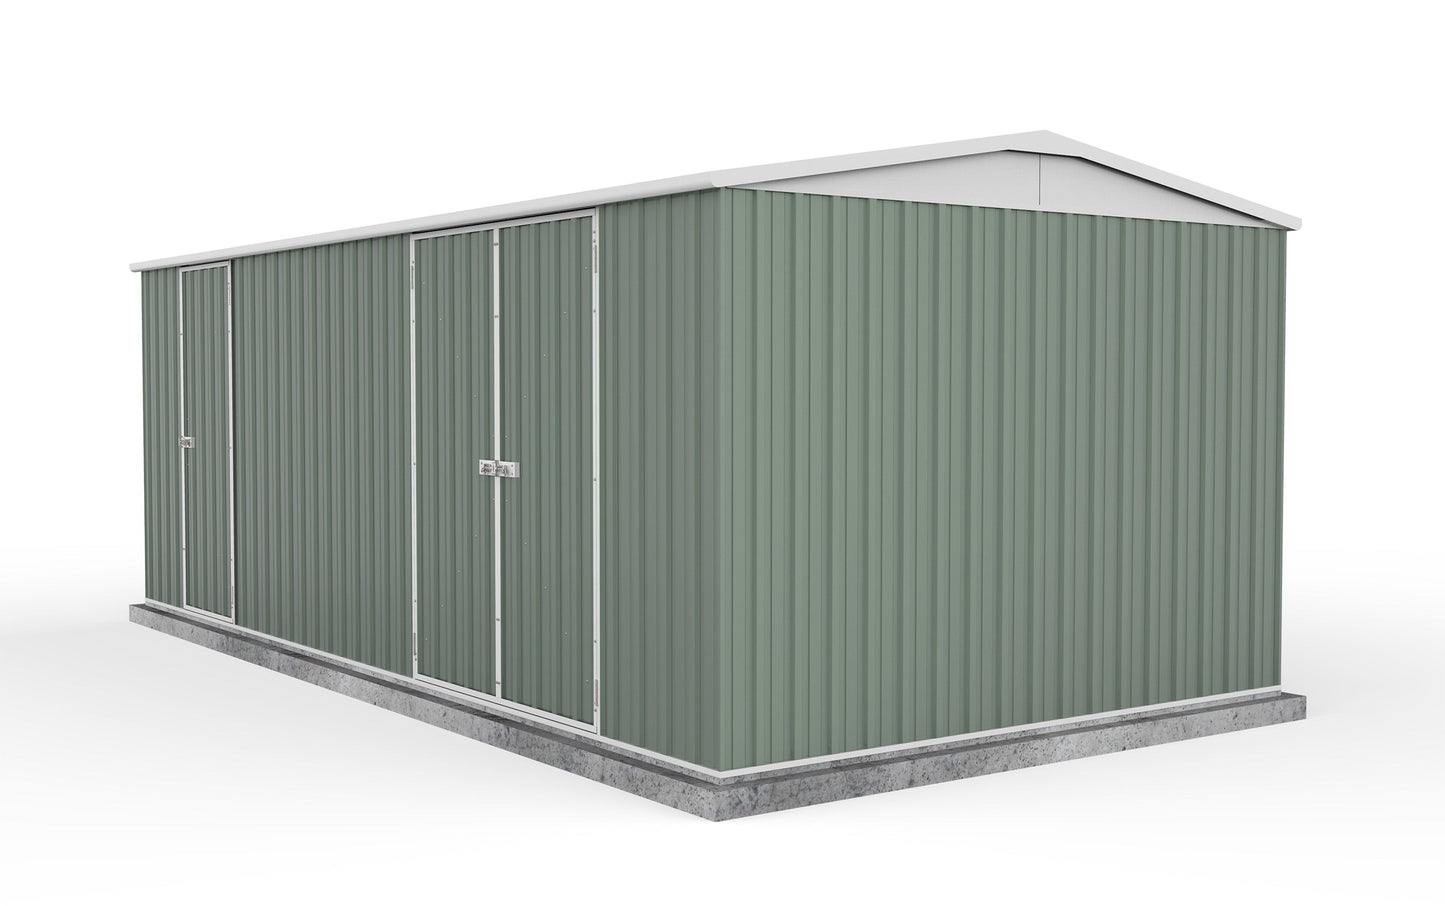 Absco 5.96mW x 3.00mD x 2.30mH Three Door Highlander Garden Shed - Pale Eucalypt